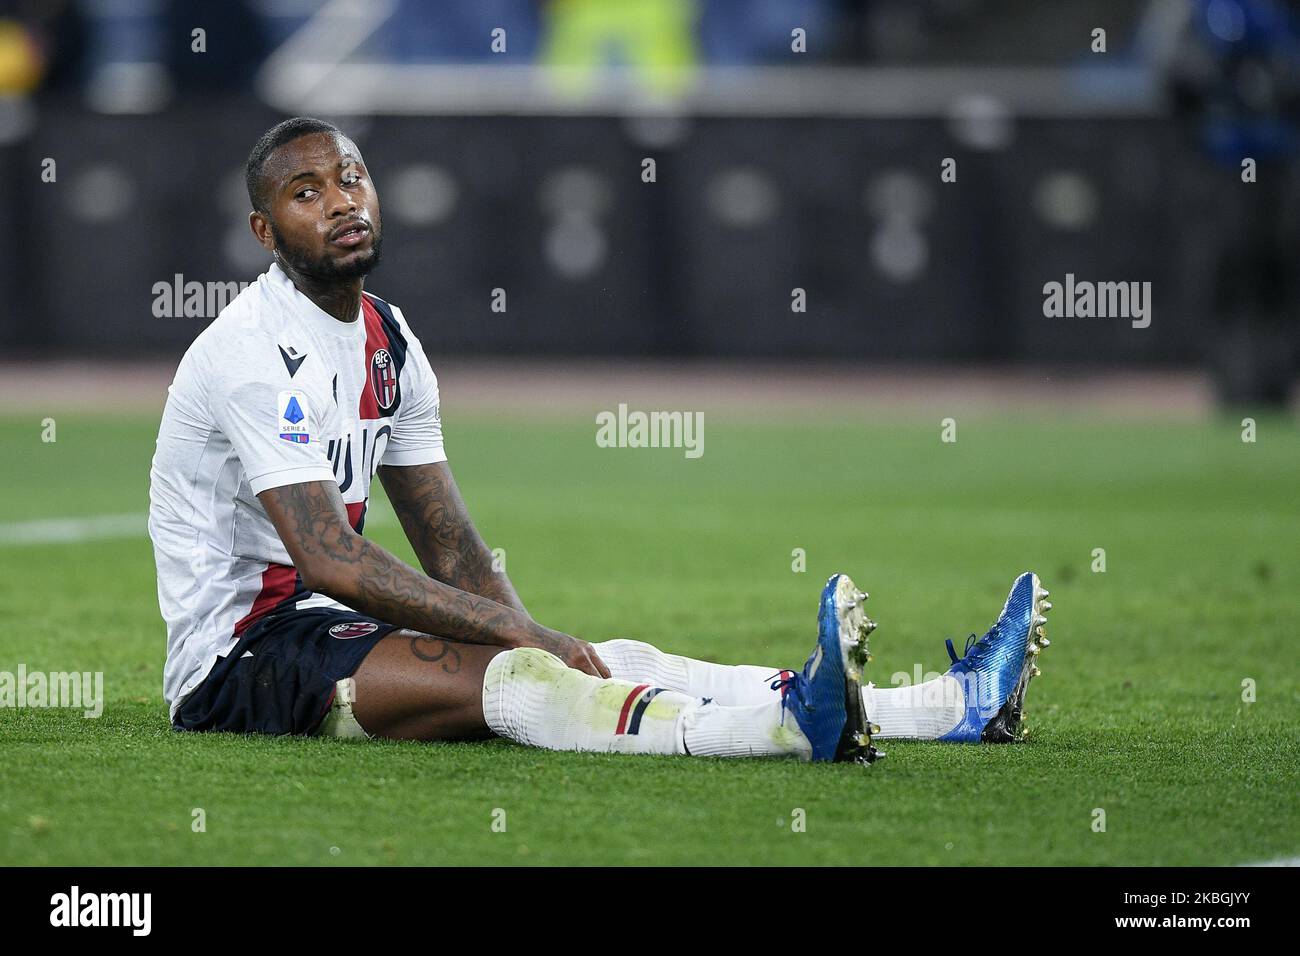 Stefano Denswil of Bologna looks dejected scoring an own goal during the Serie A match between Roma and Bologna at Stadio Olimpico, Rome, Italy on 7 February 2020. (Photo by Giuseppe Maffia/NurPhoto) Stock Photo